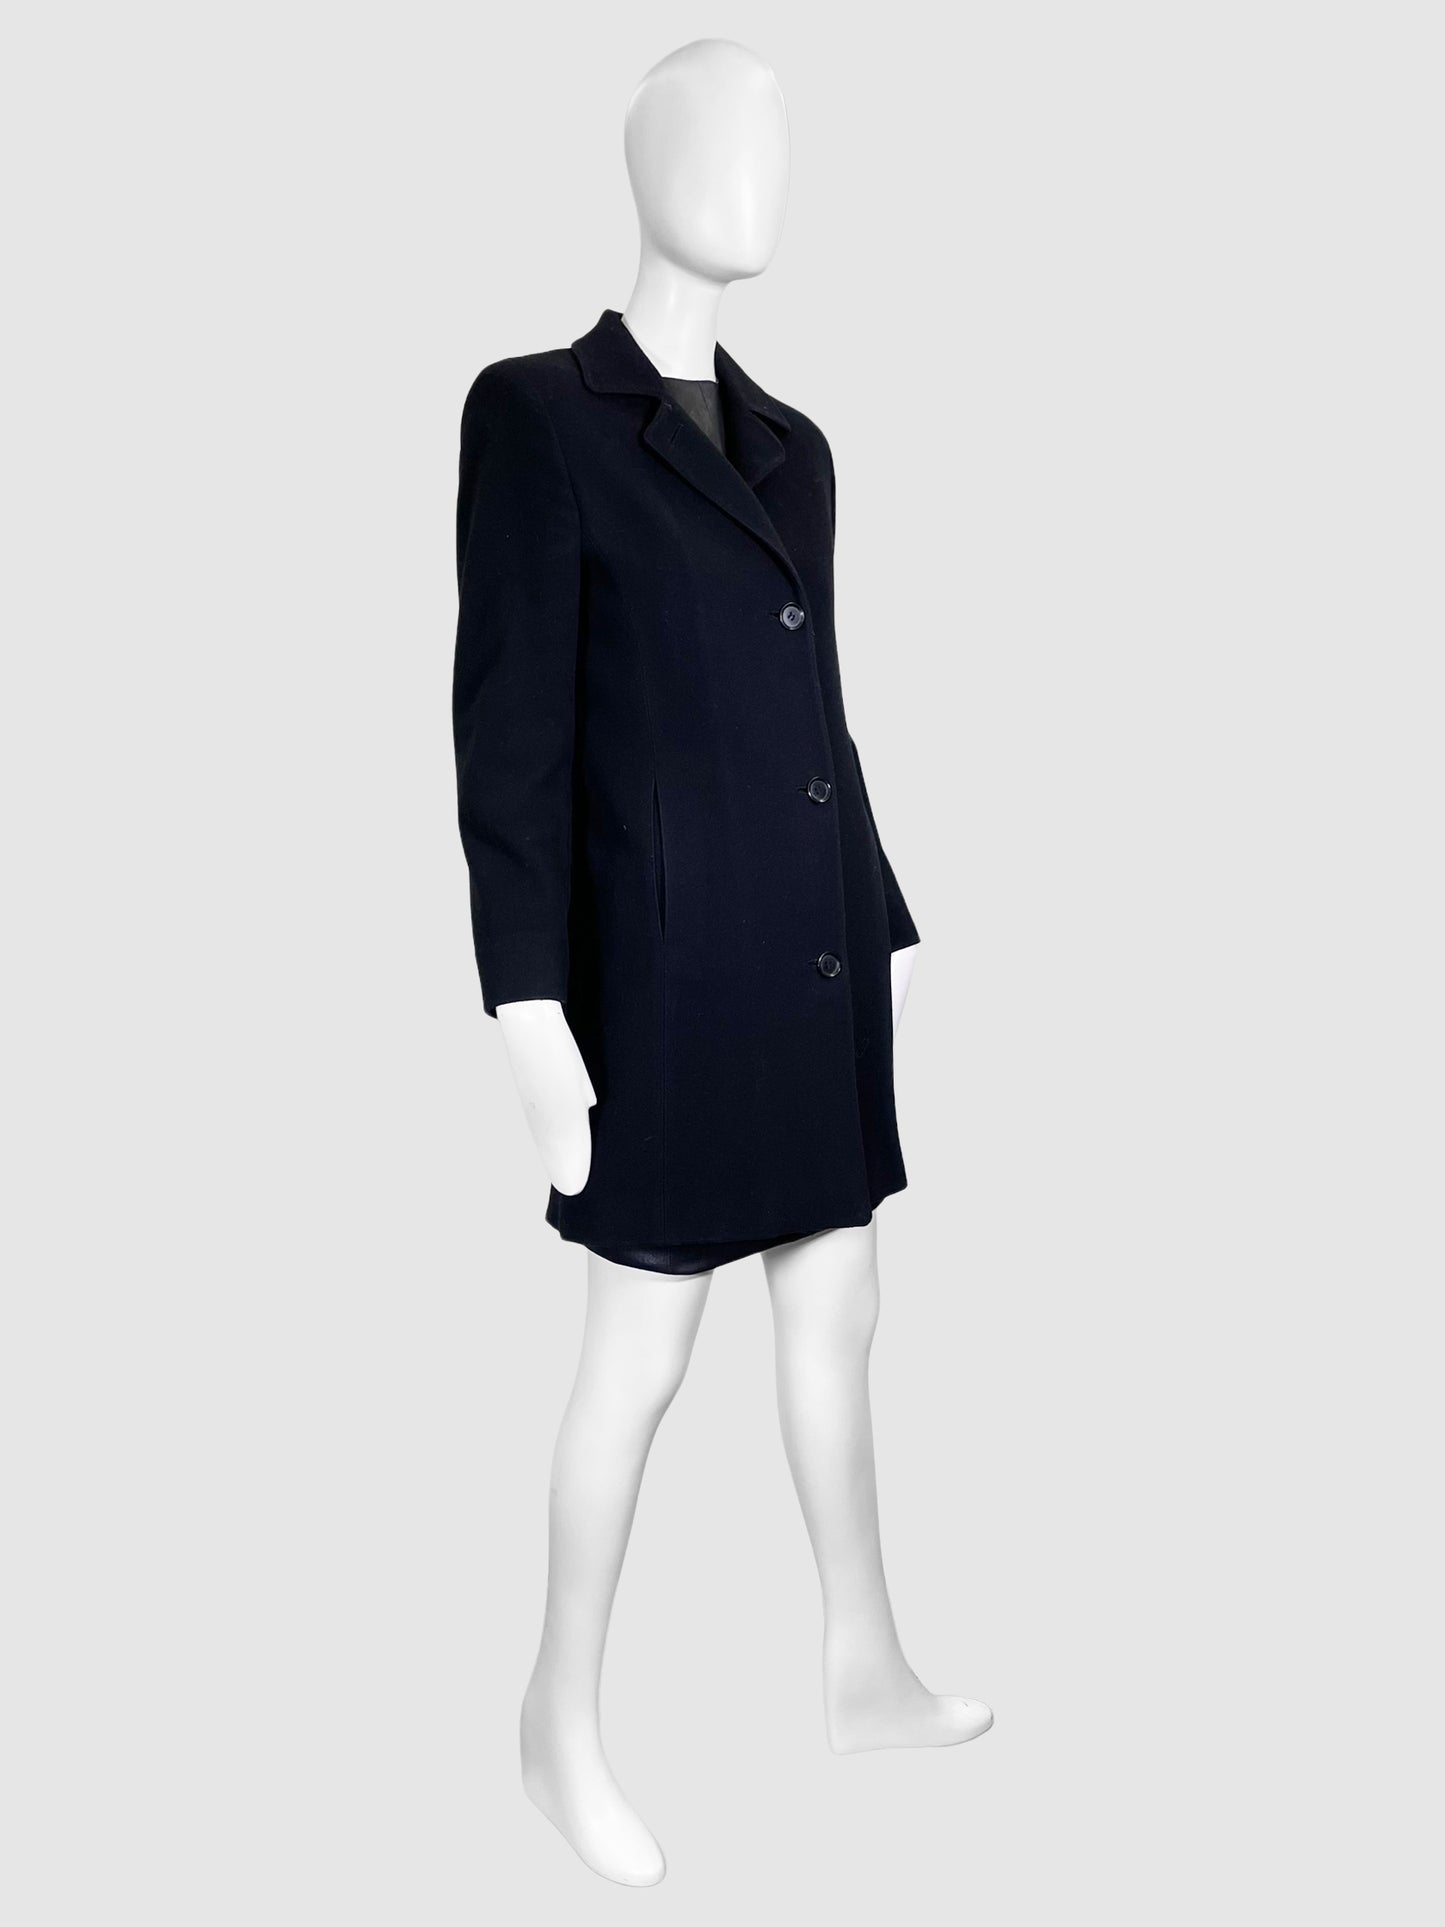 Tailored Wool Coat - Size 2